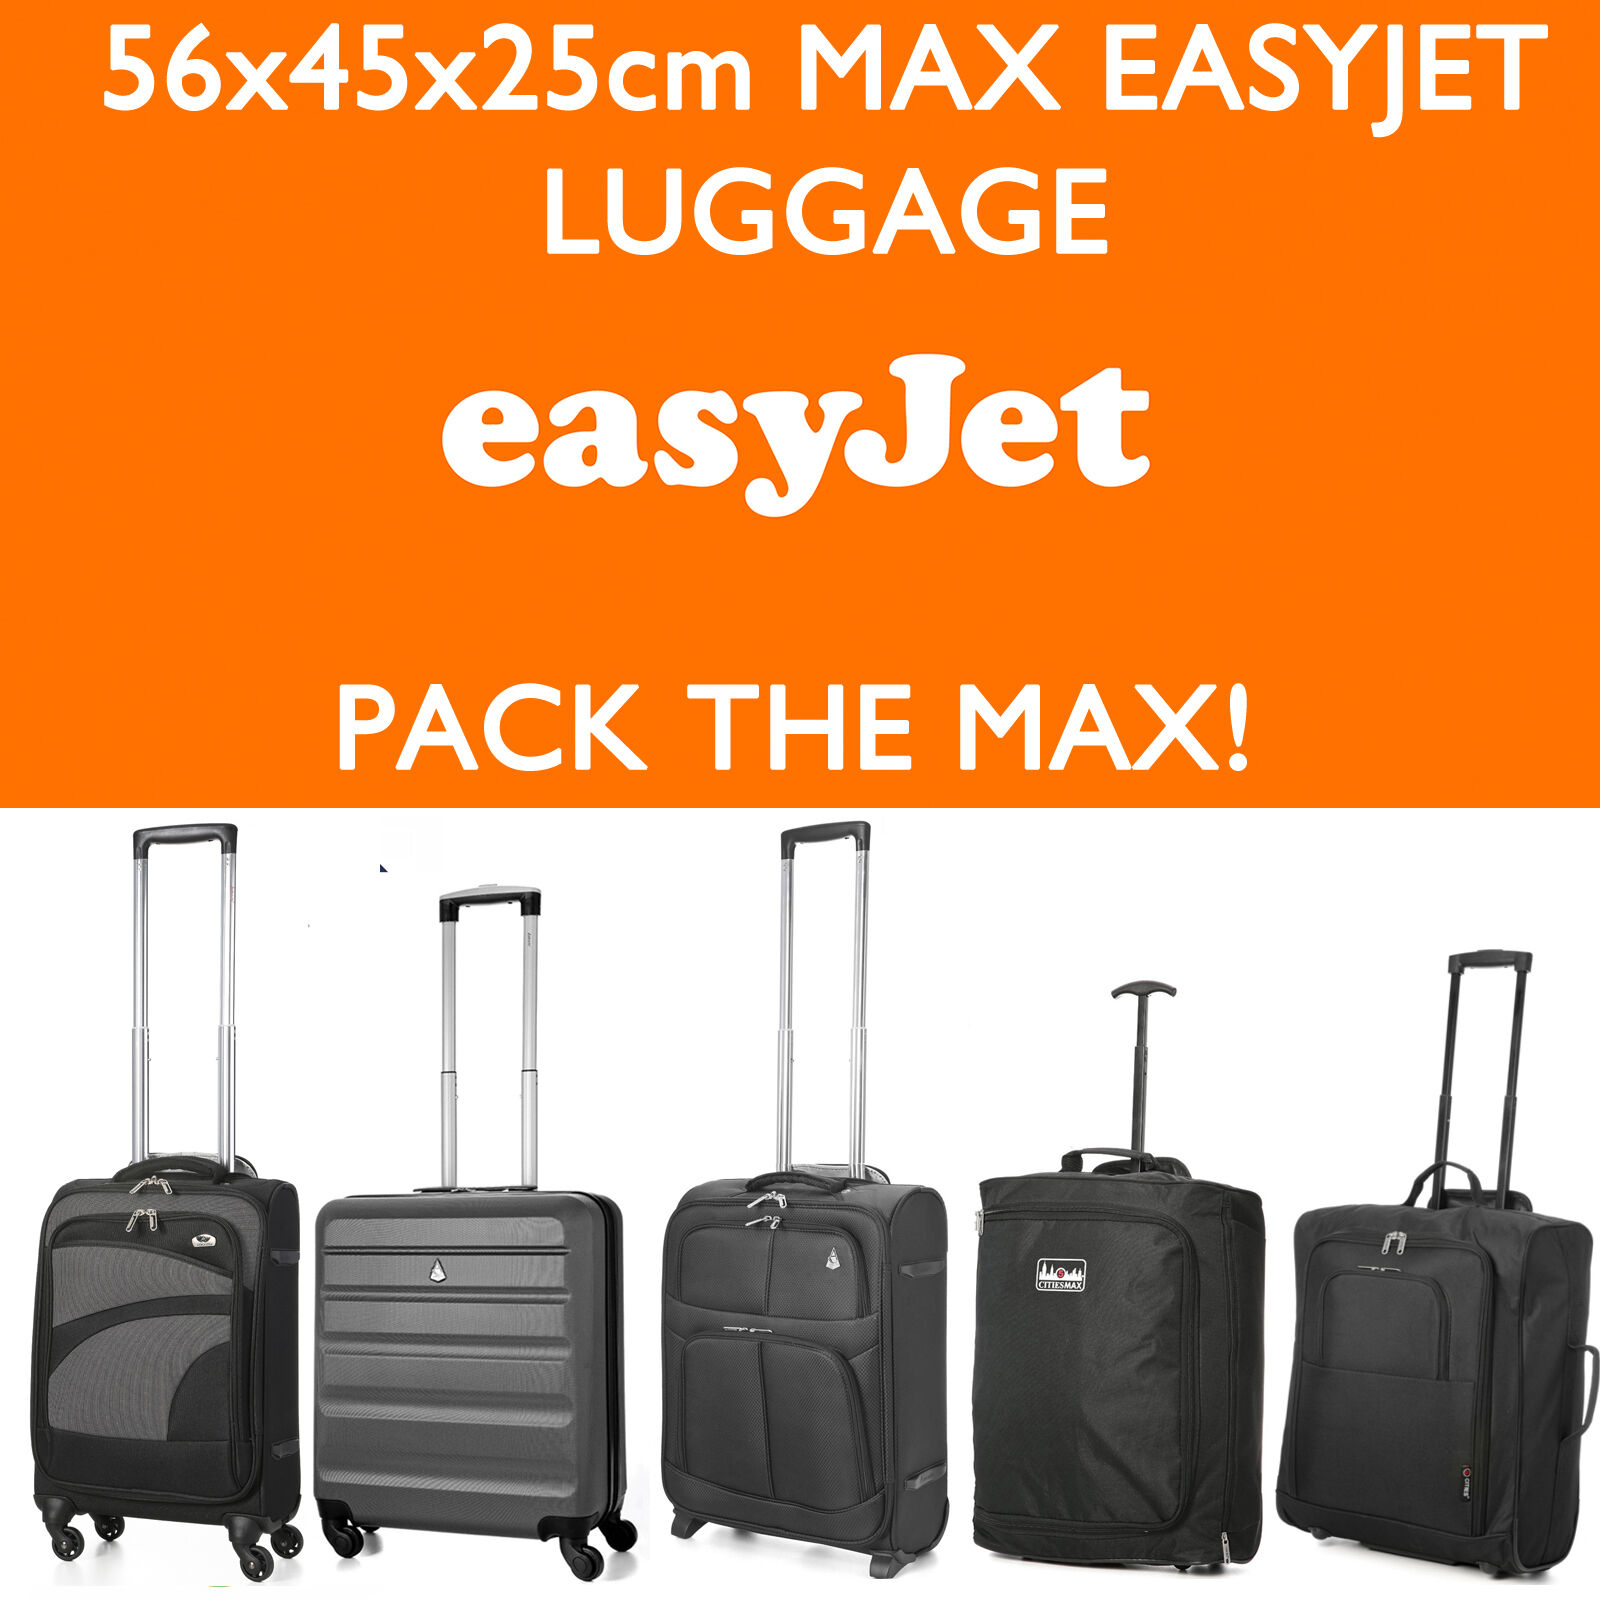 EASYJET 56x45x25 MAX LARGE CABIN HAND CARRY LUGGAGE SUITCASE TRAVEL TROLLEY BAGS | eBay